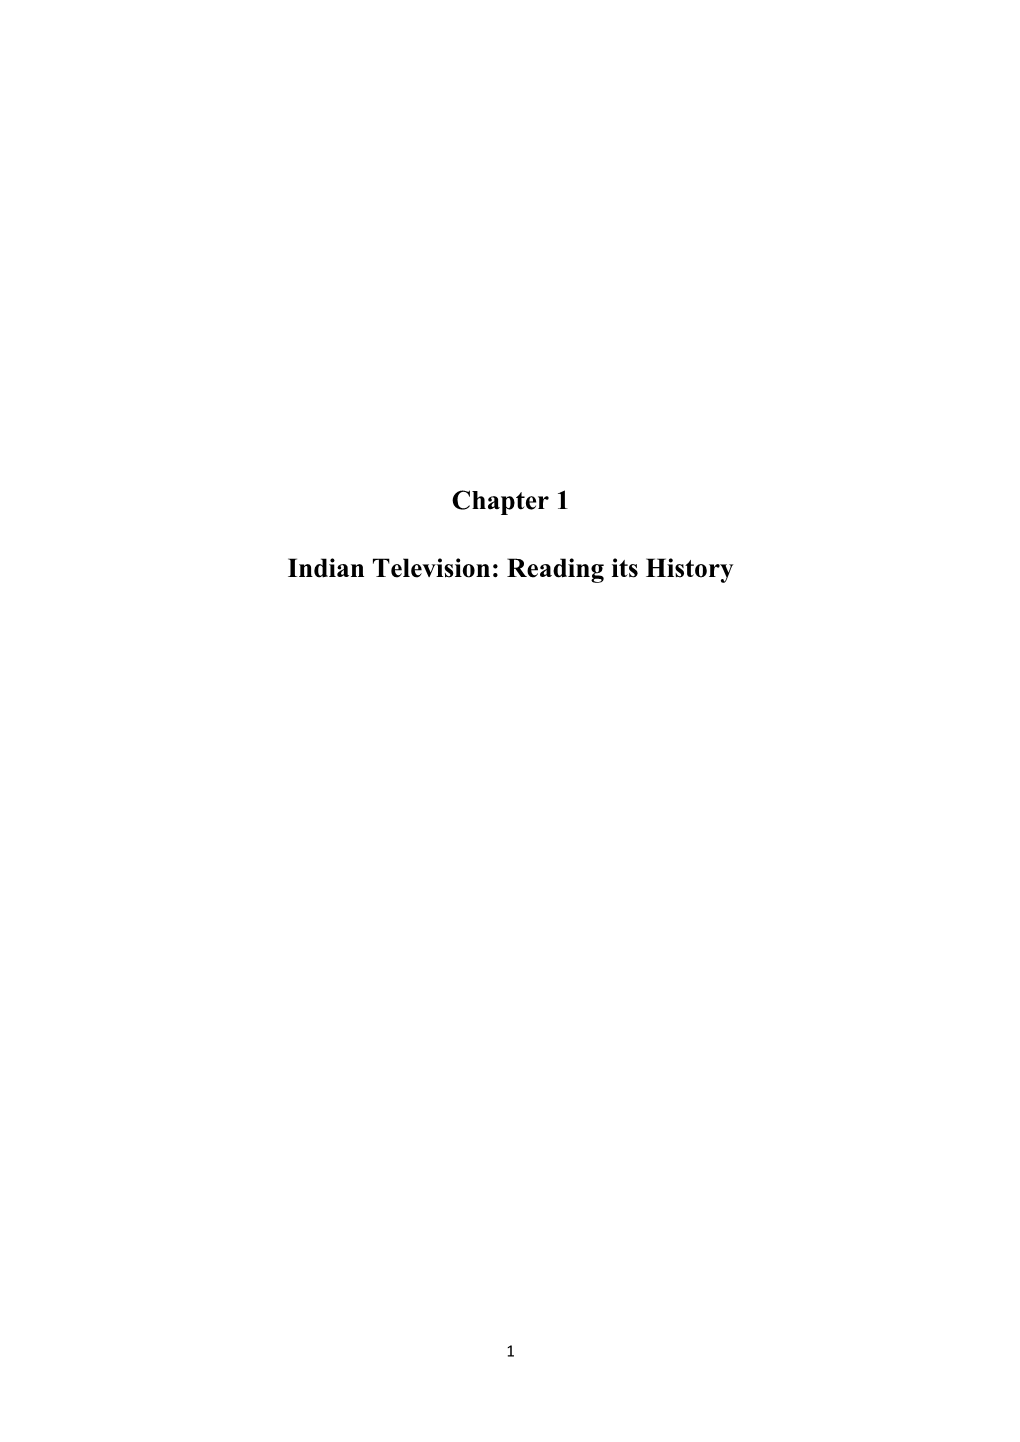 Chapter 1 Indian Television: Reading Its History